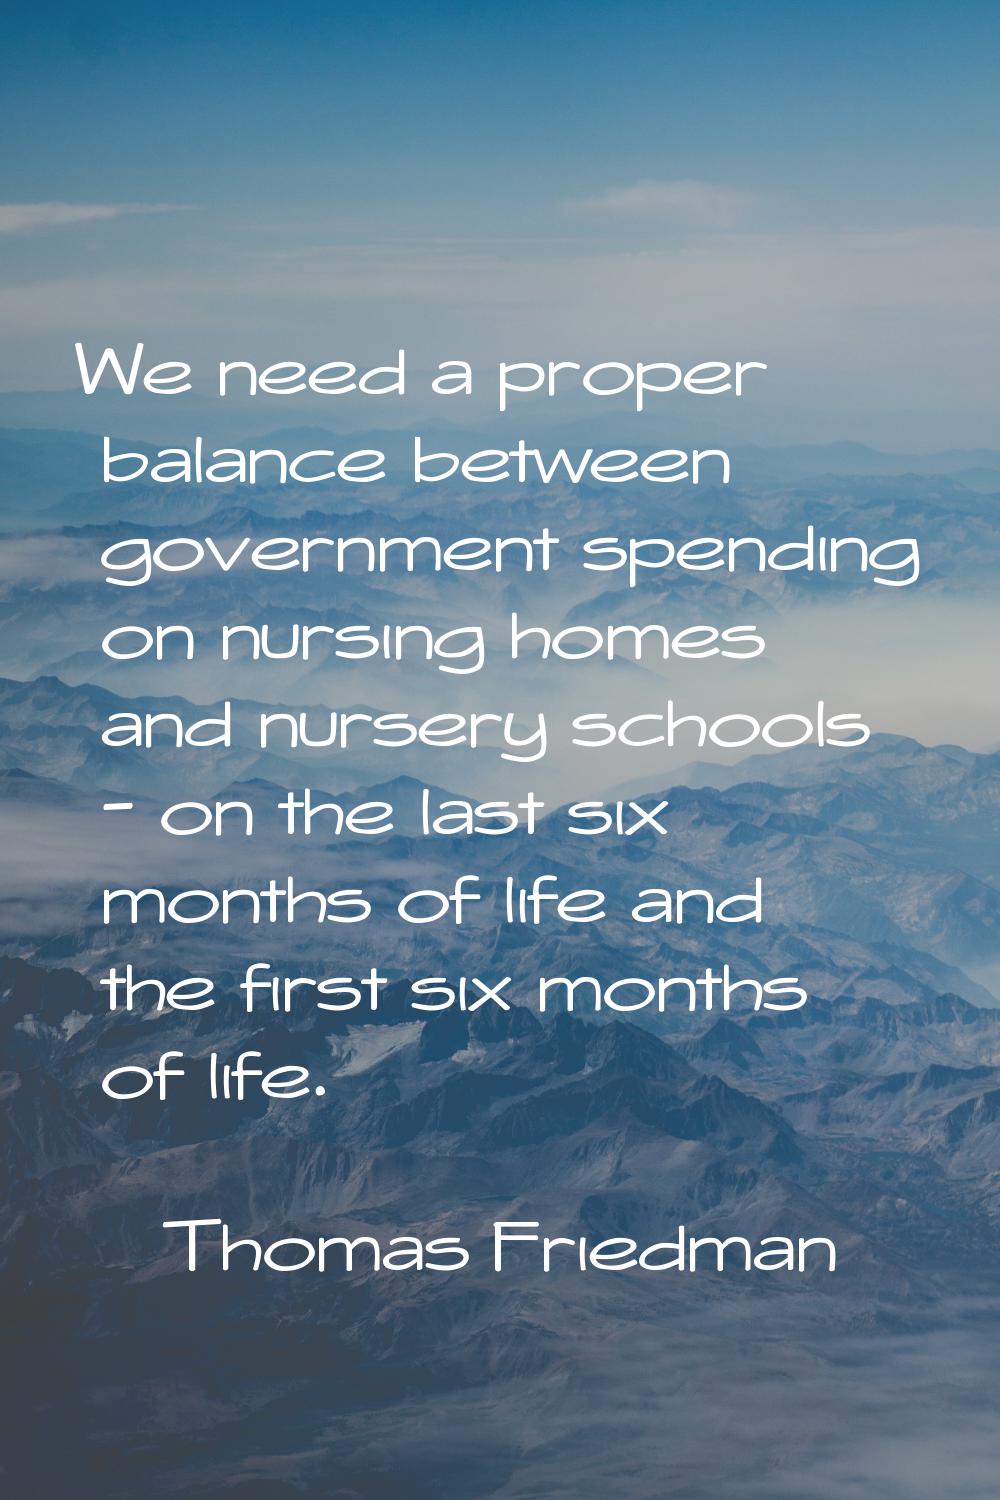 We need a proper balance between government spending on nursing homes and nursery schools - on the 